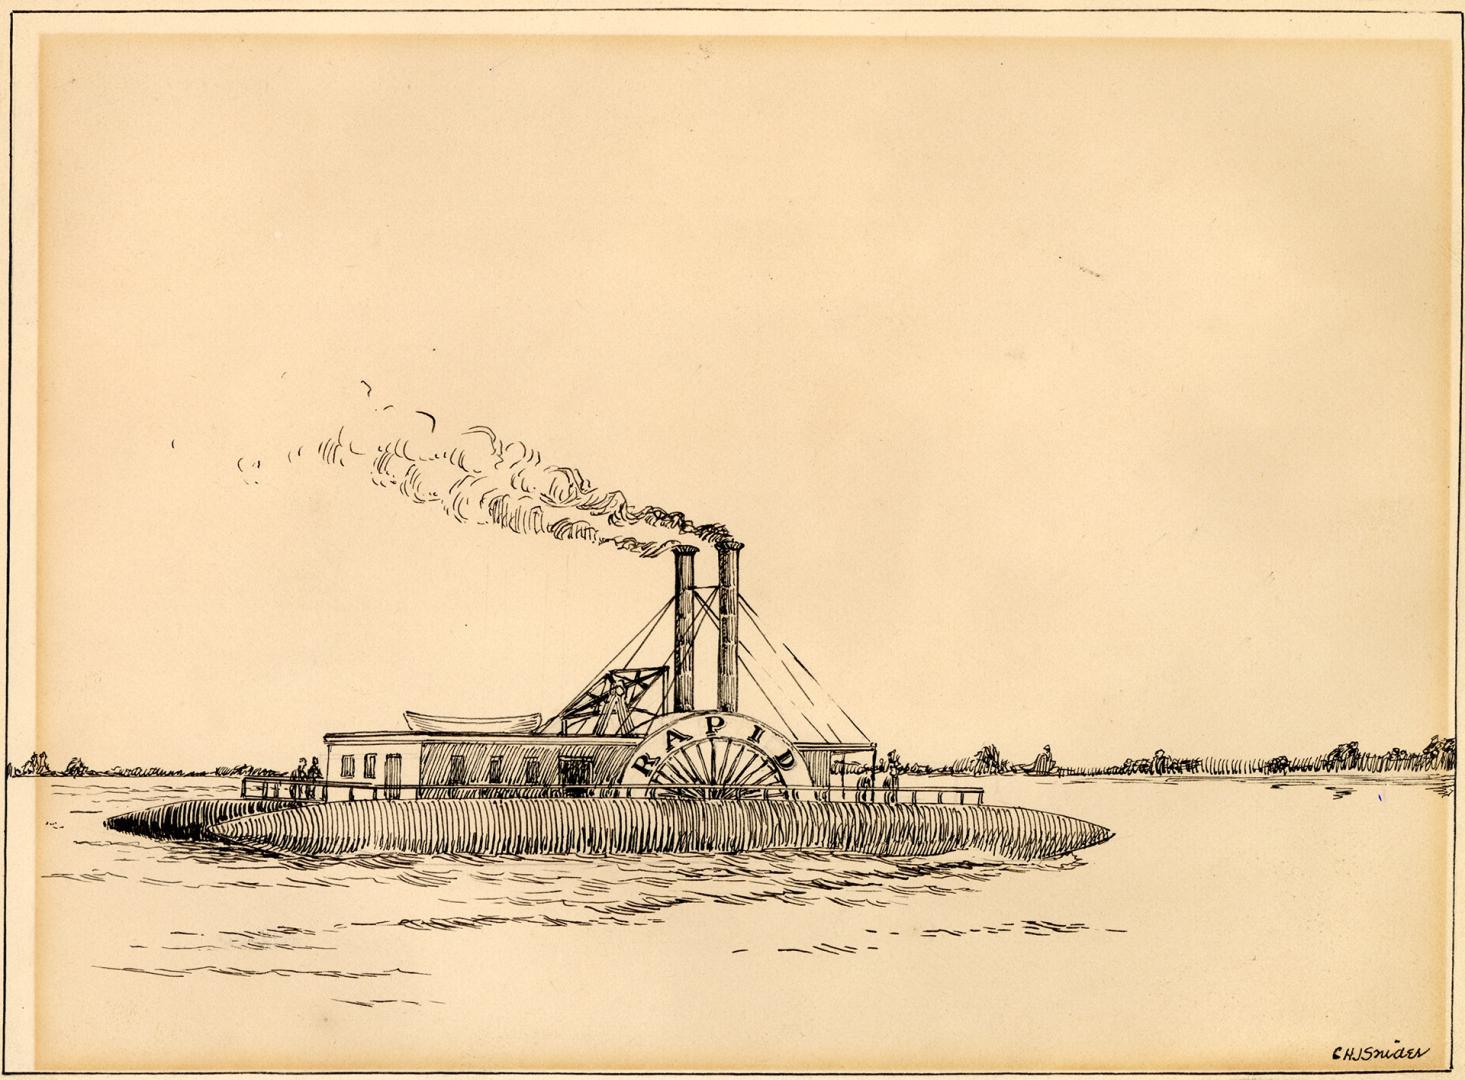 Steamer "Rapid", 1834 (St. Lawrence River, Ontario)